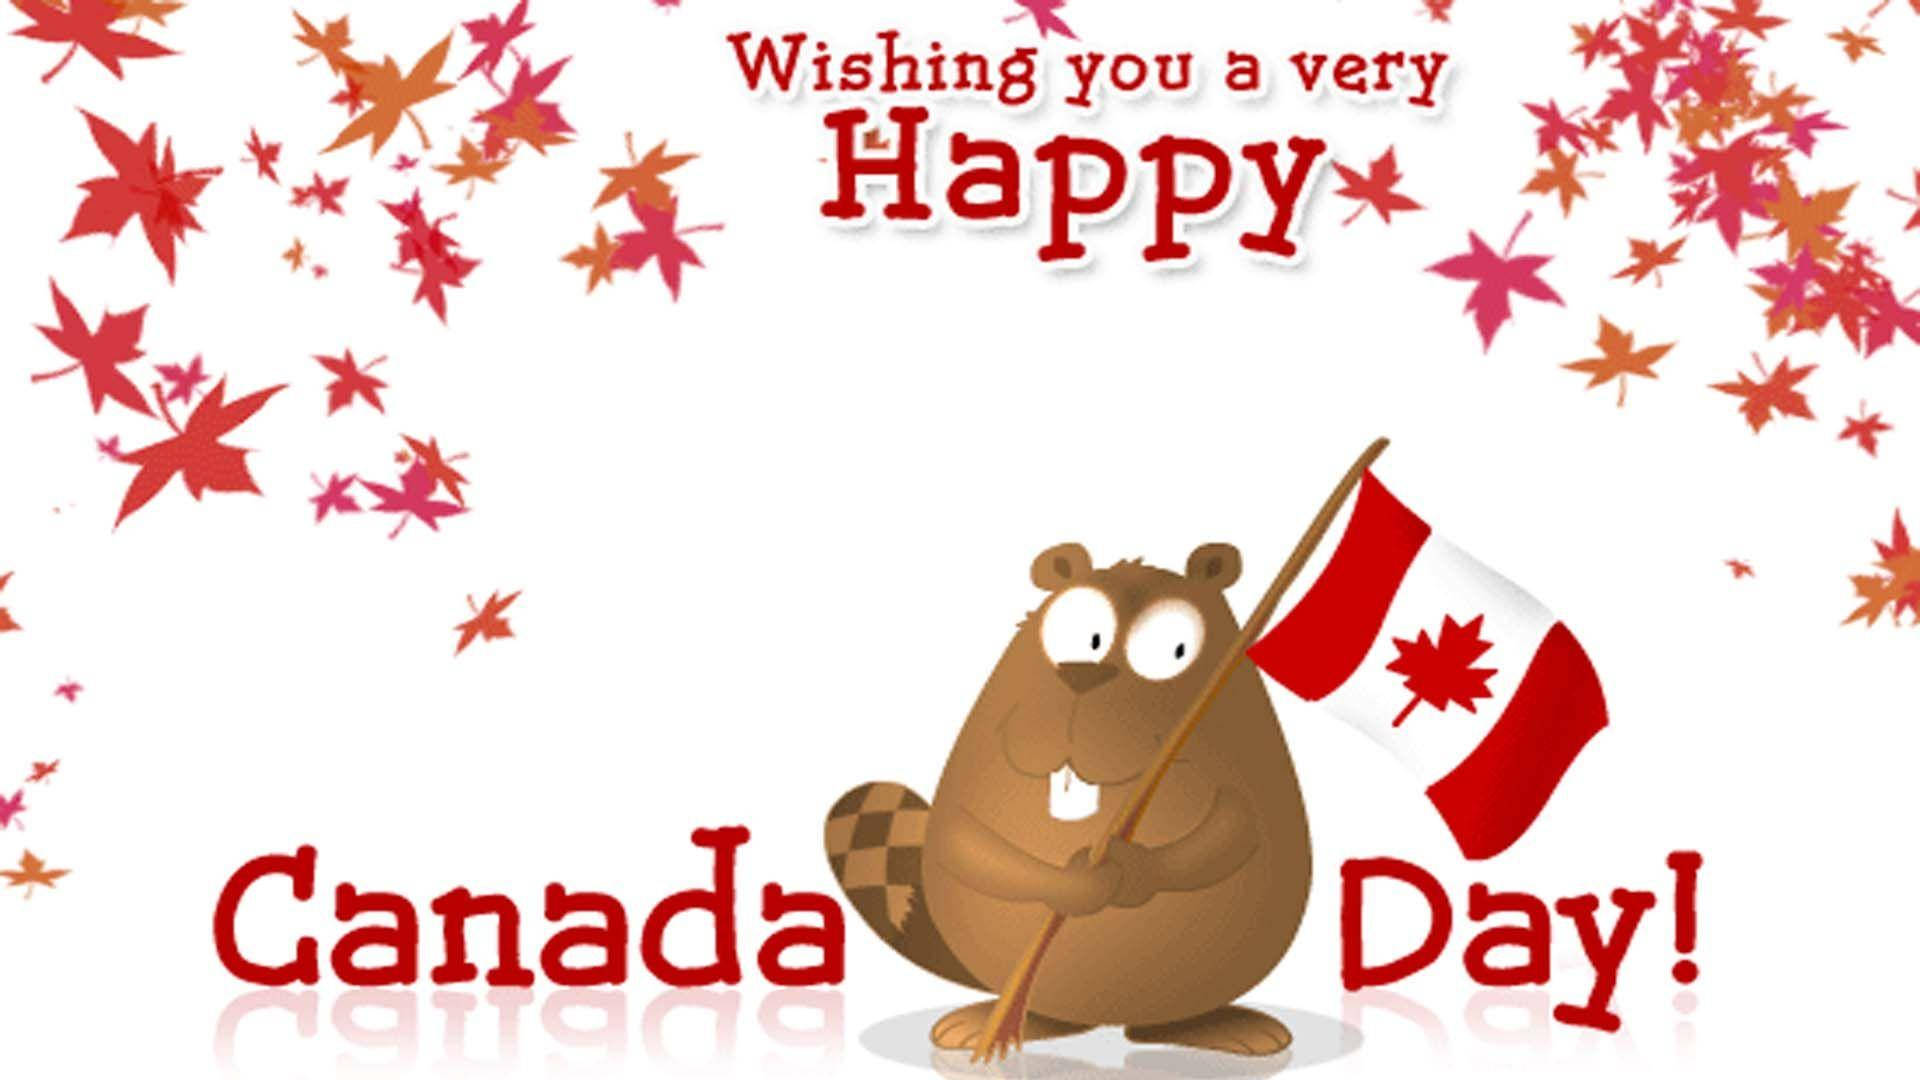 Canada Day Wallpaper Images